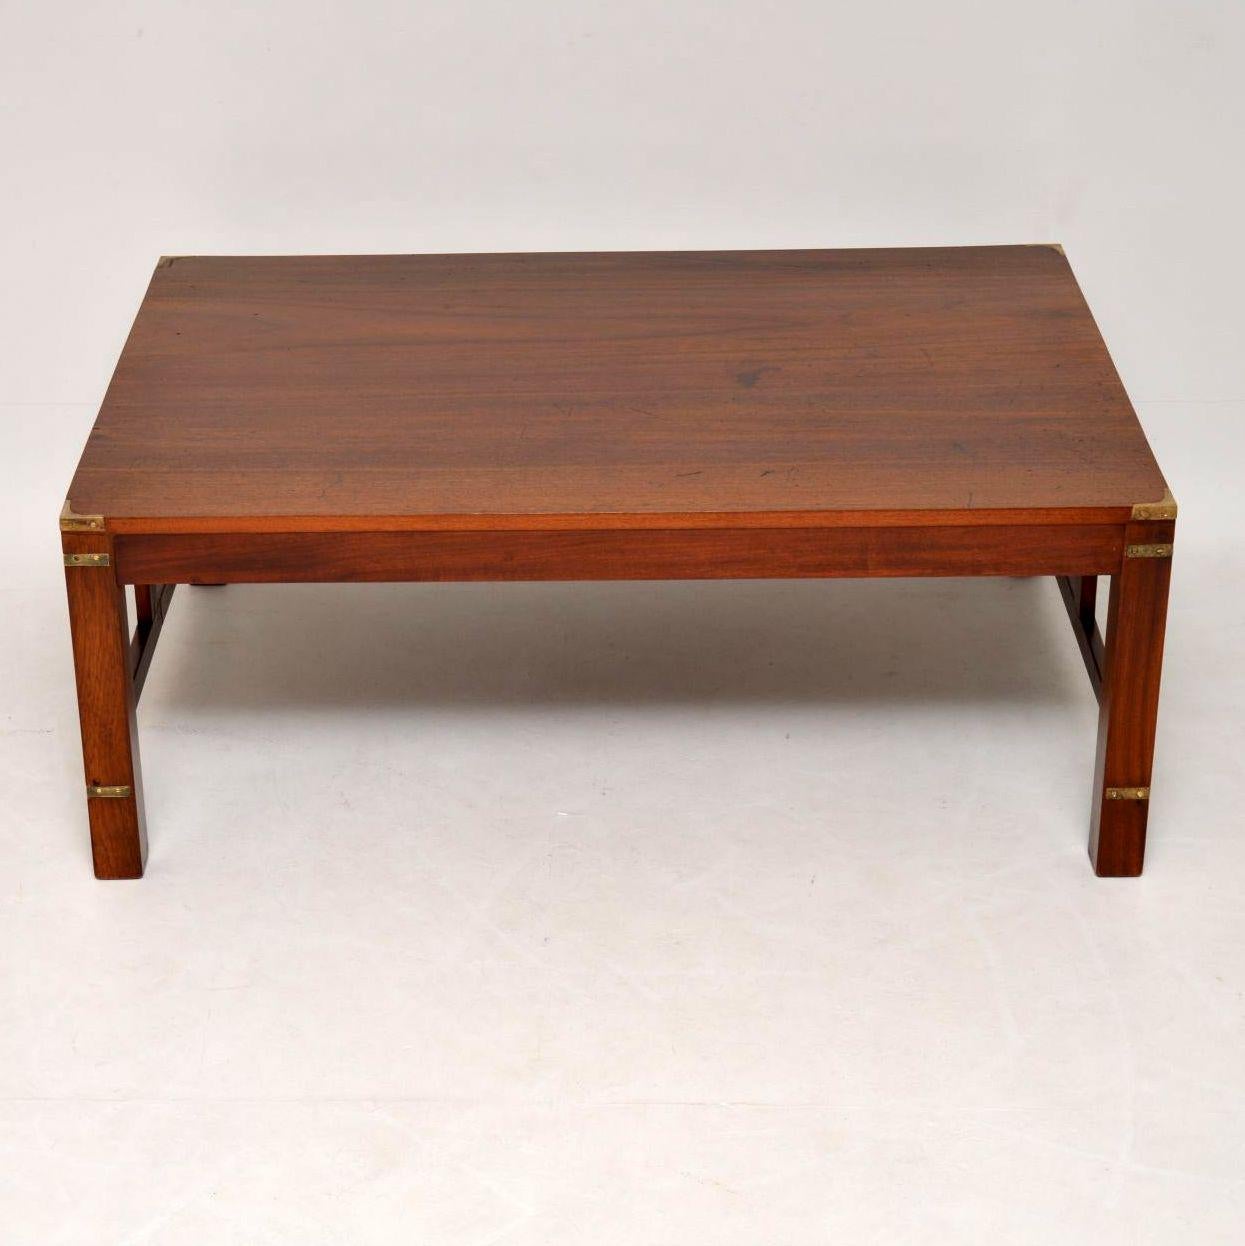 Large antique solid mahogany military style coffee table in great condition and with lots of character. It’s a very well constructed table with brass military fittings and cross stretchers between the legs and supports. I believe it has been adapted